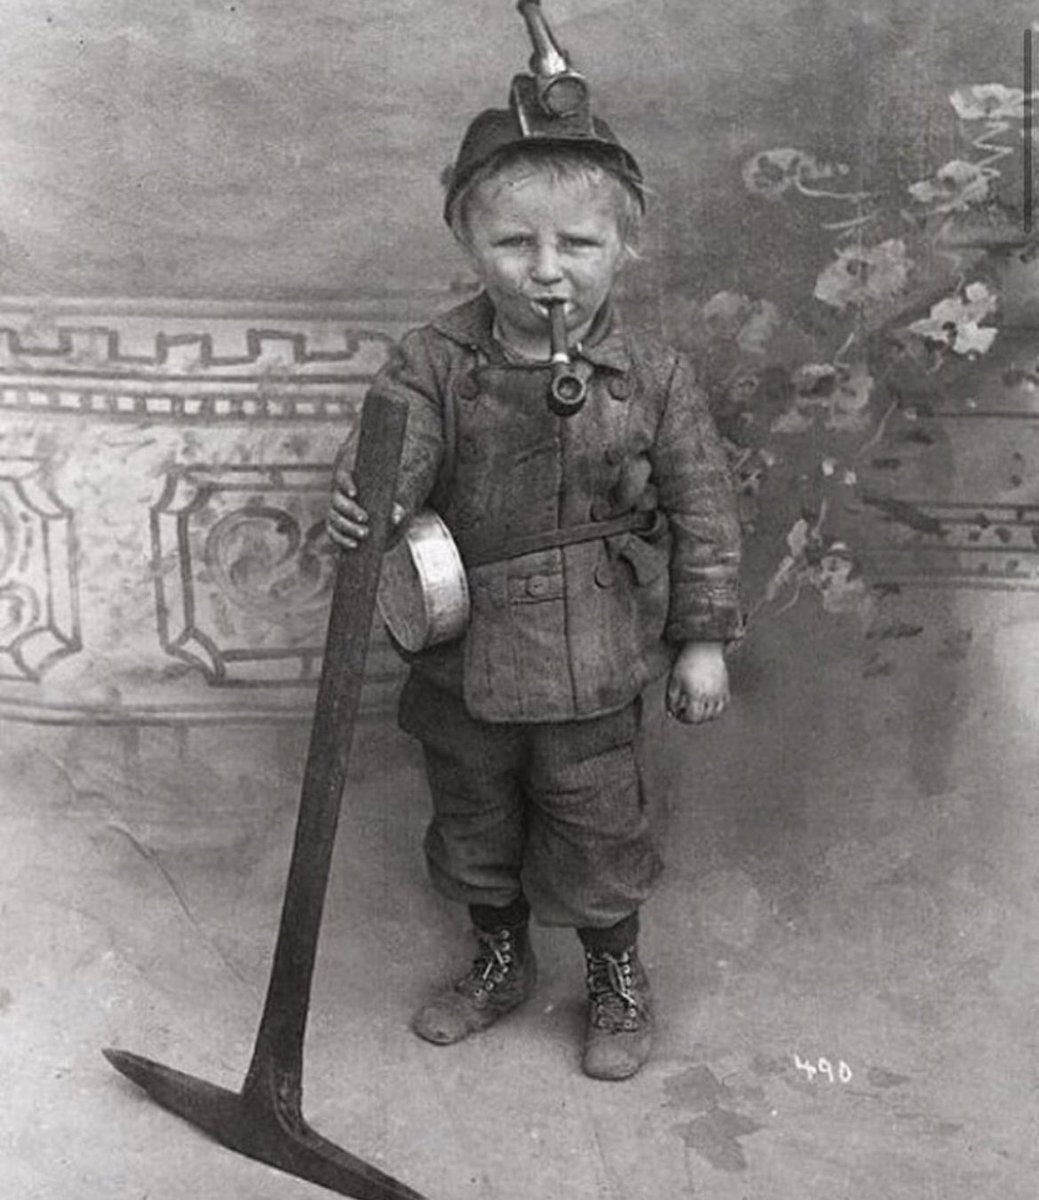 In the early 1900s, in Utah or Colorado, USA, a young miner boy toiled in the coal mines. Thousands of boys under the age of 14 were employed in these dangerous underground tunnels. The process involved drilling, blasting, and digging coal. However, this hazardous occupation